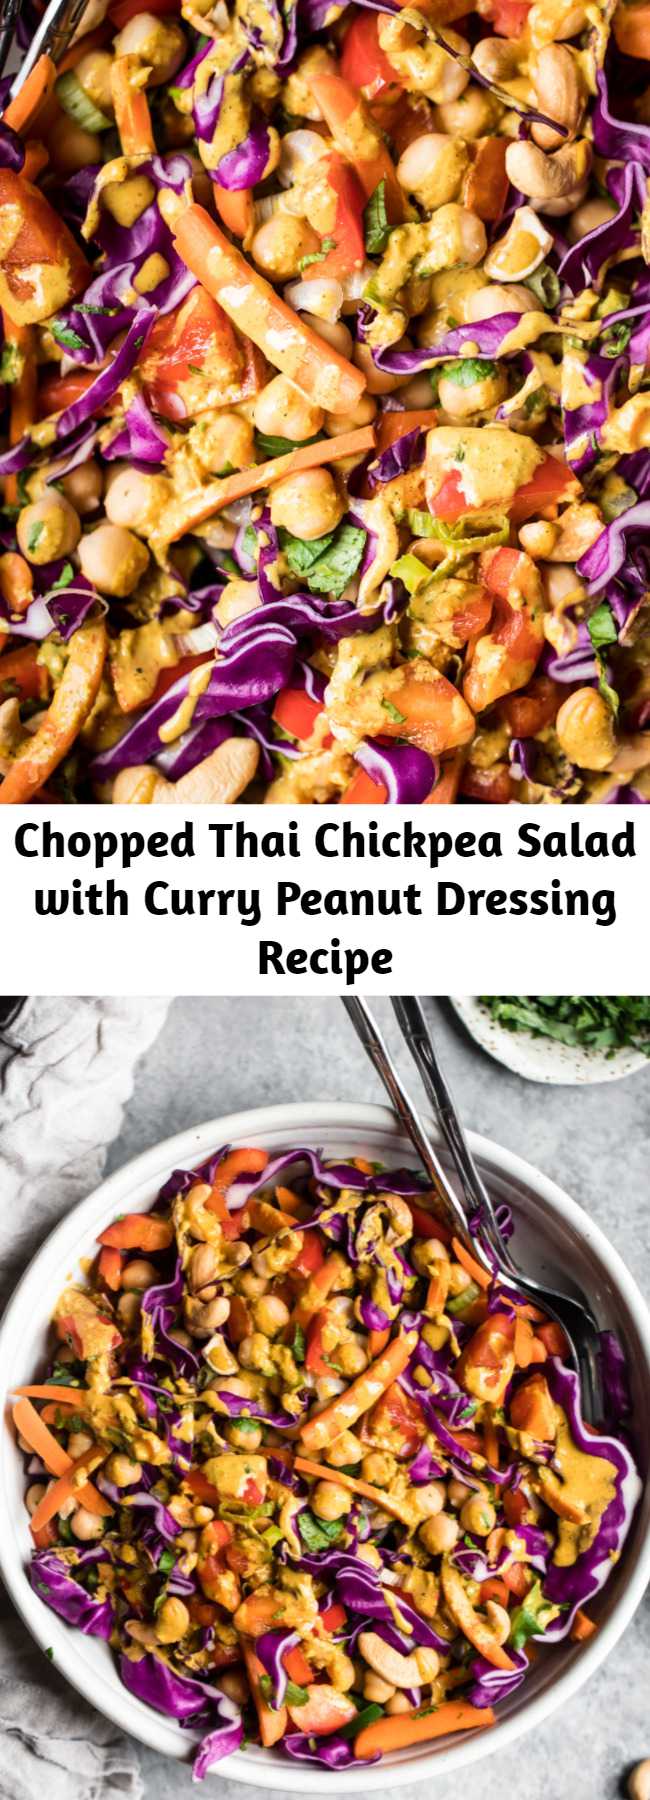 Chopped Thai Chickpea Salad with Curry Peanut Dressing Recipe - Beautiful plant based Chopped Thai Chickpea Salad with a super flavorful peanut curry dressing. Healthy, easy to make and a great way to get your veggies in! #vegetarian #vegetarianrecipe #mealprepping #saladrecipe